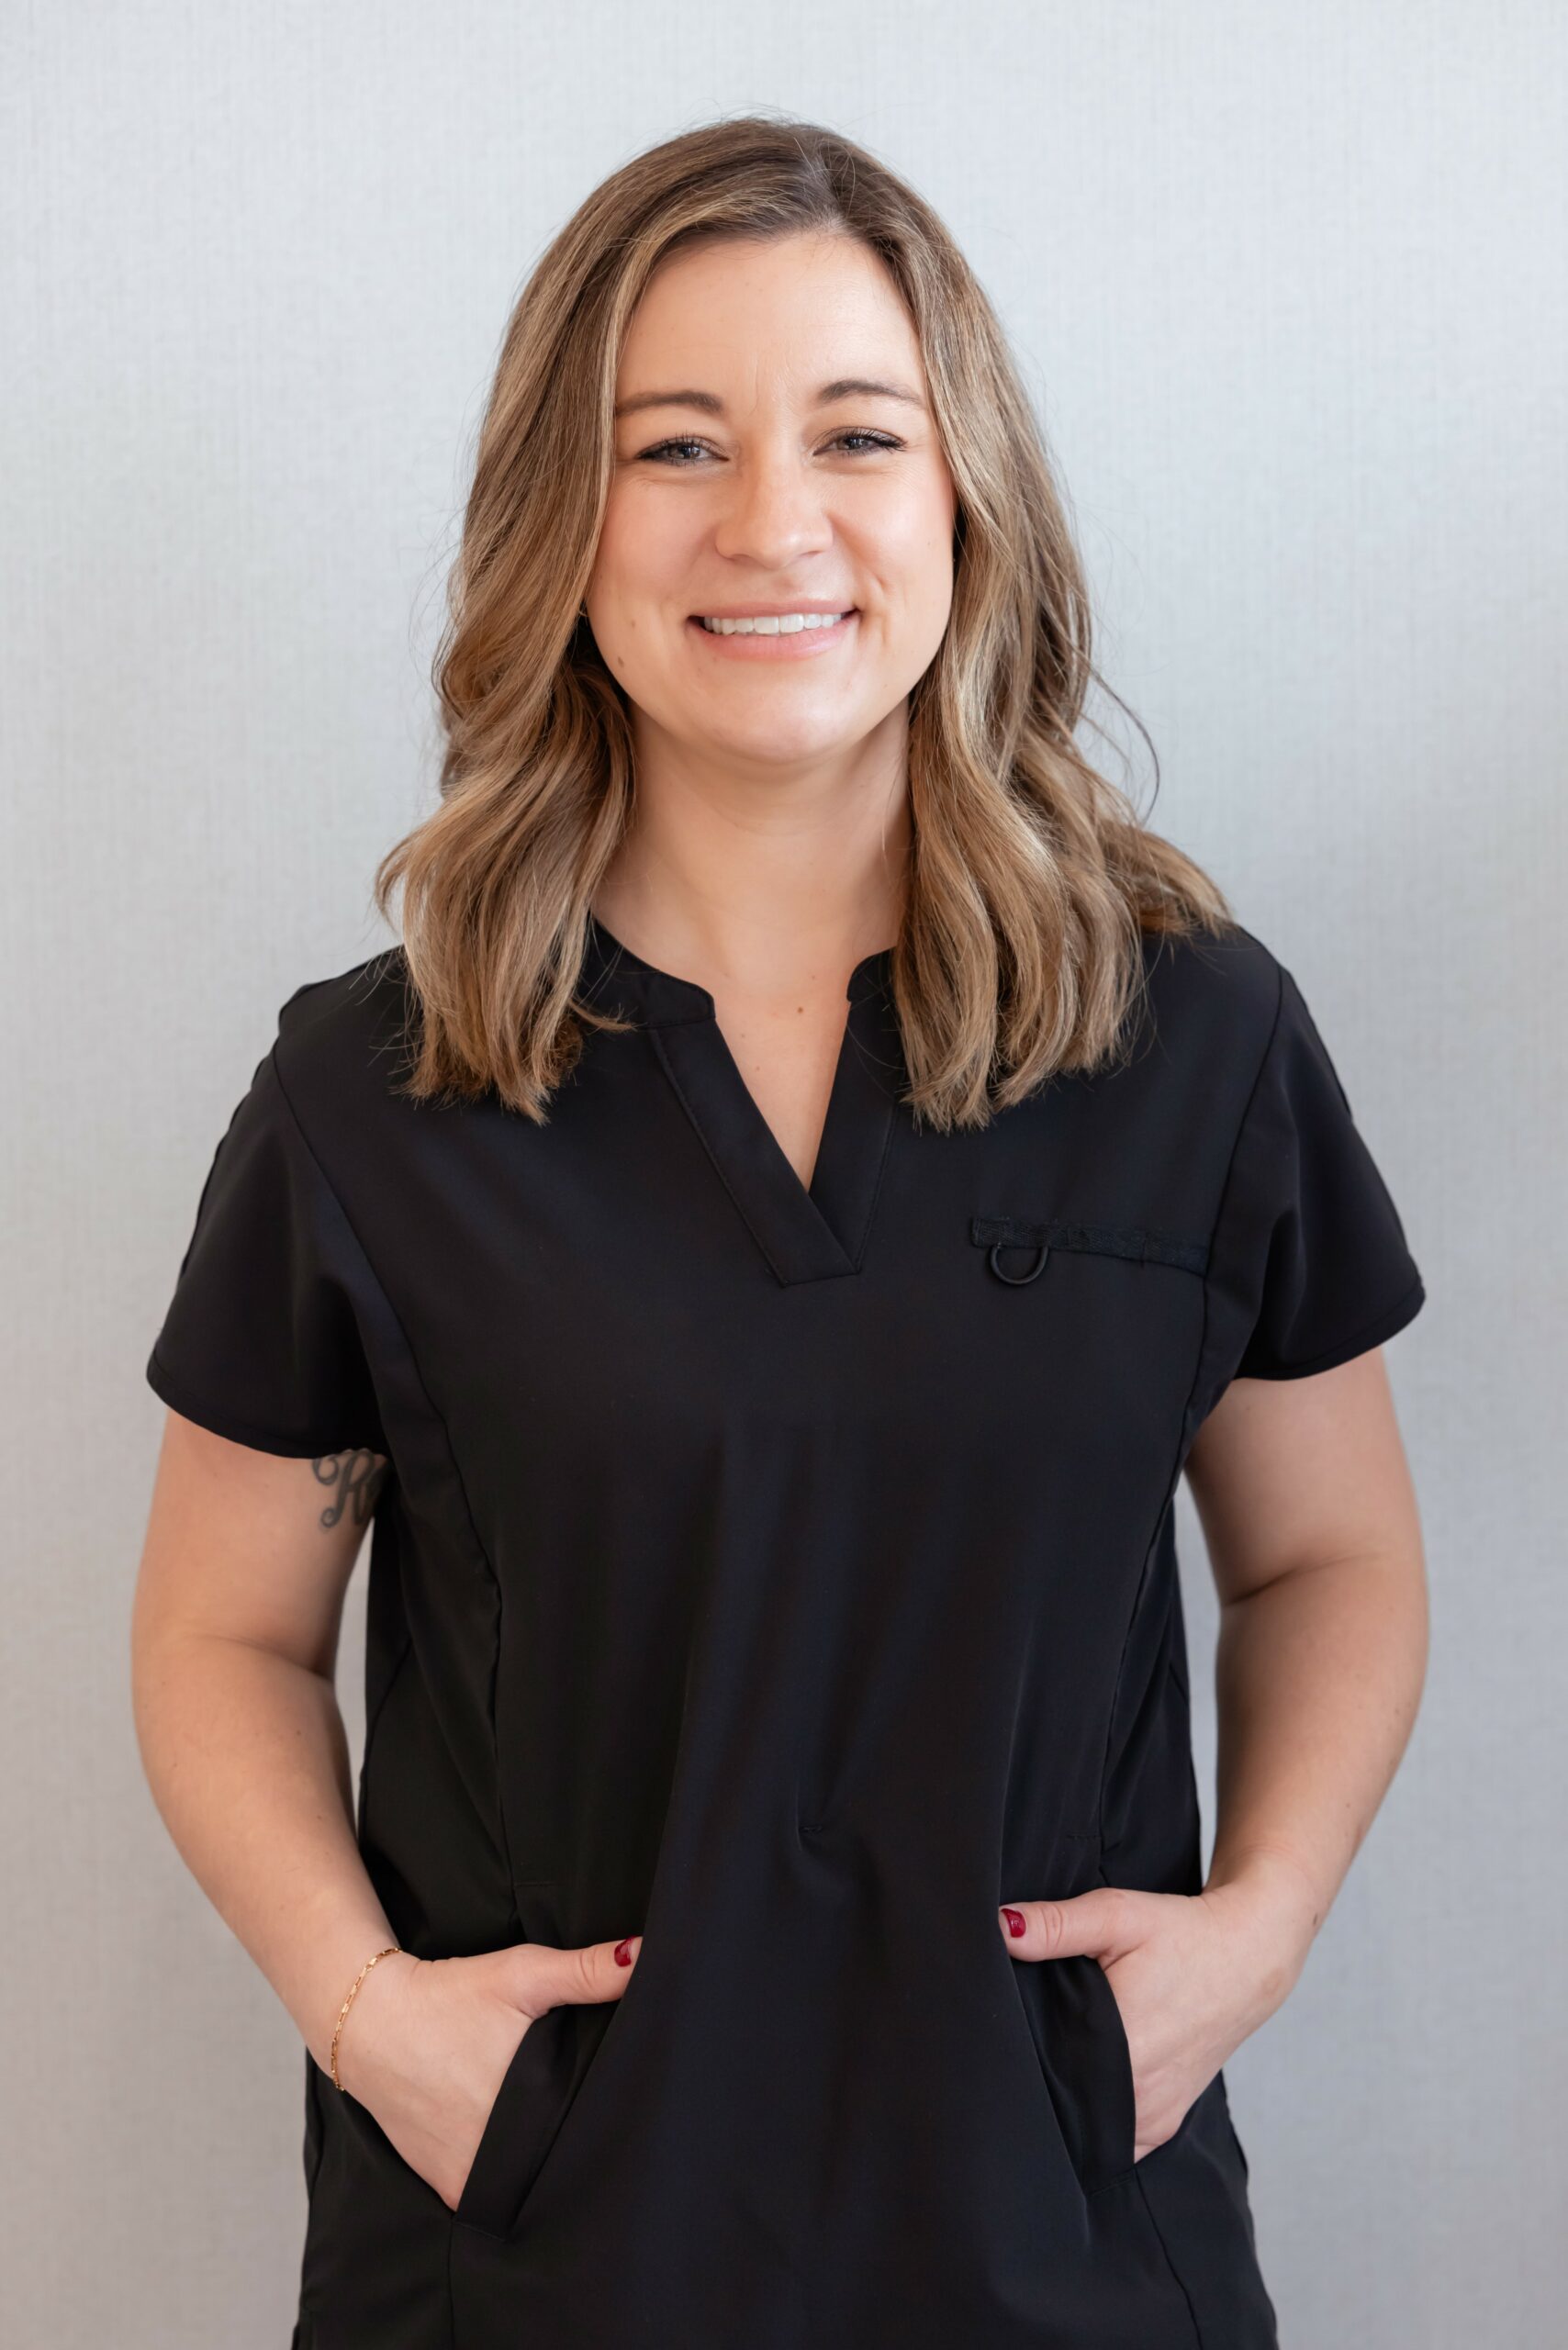 photo of a female dental assistant